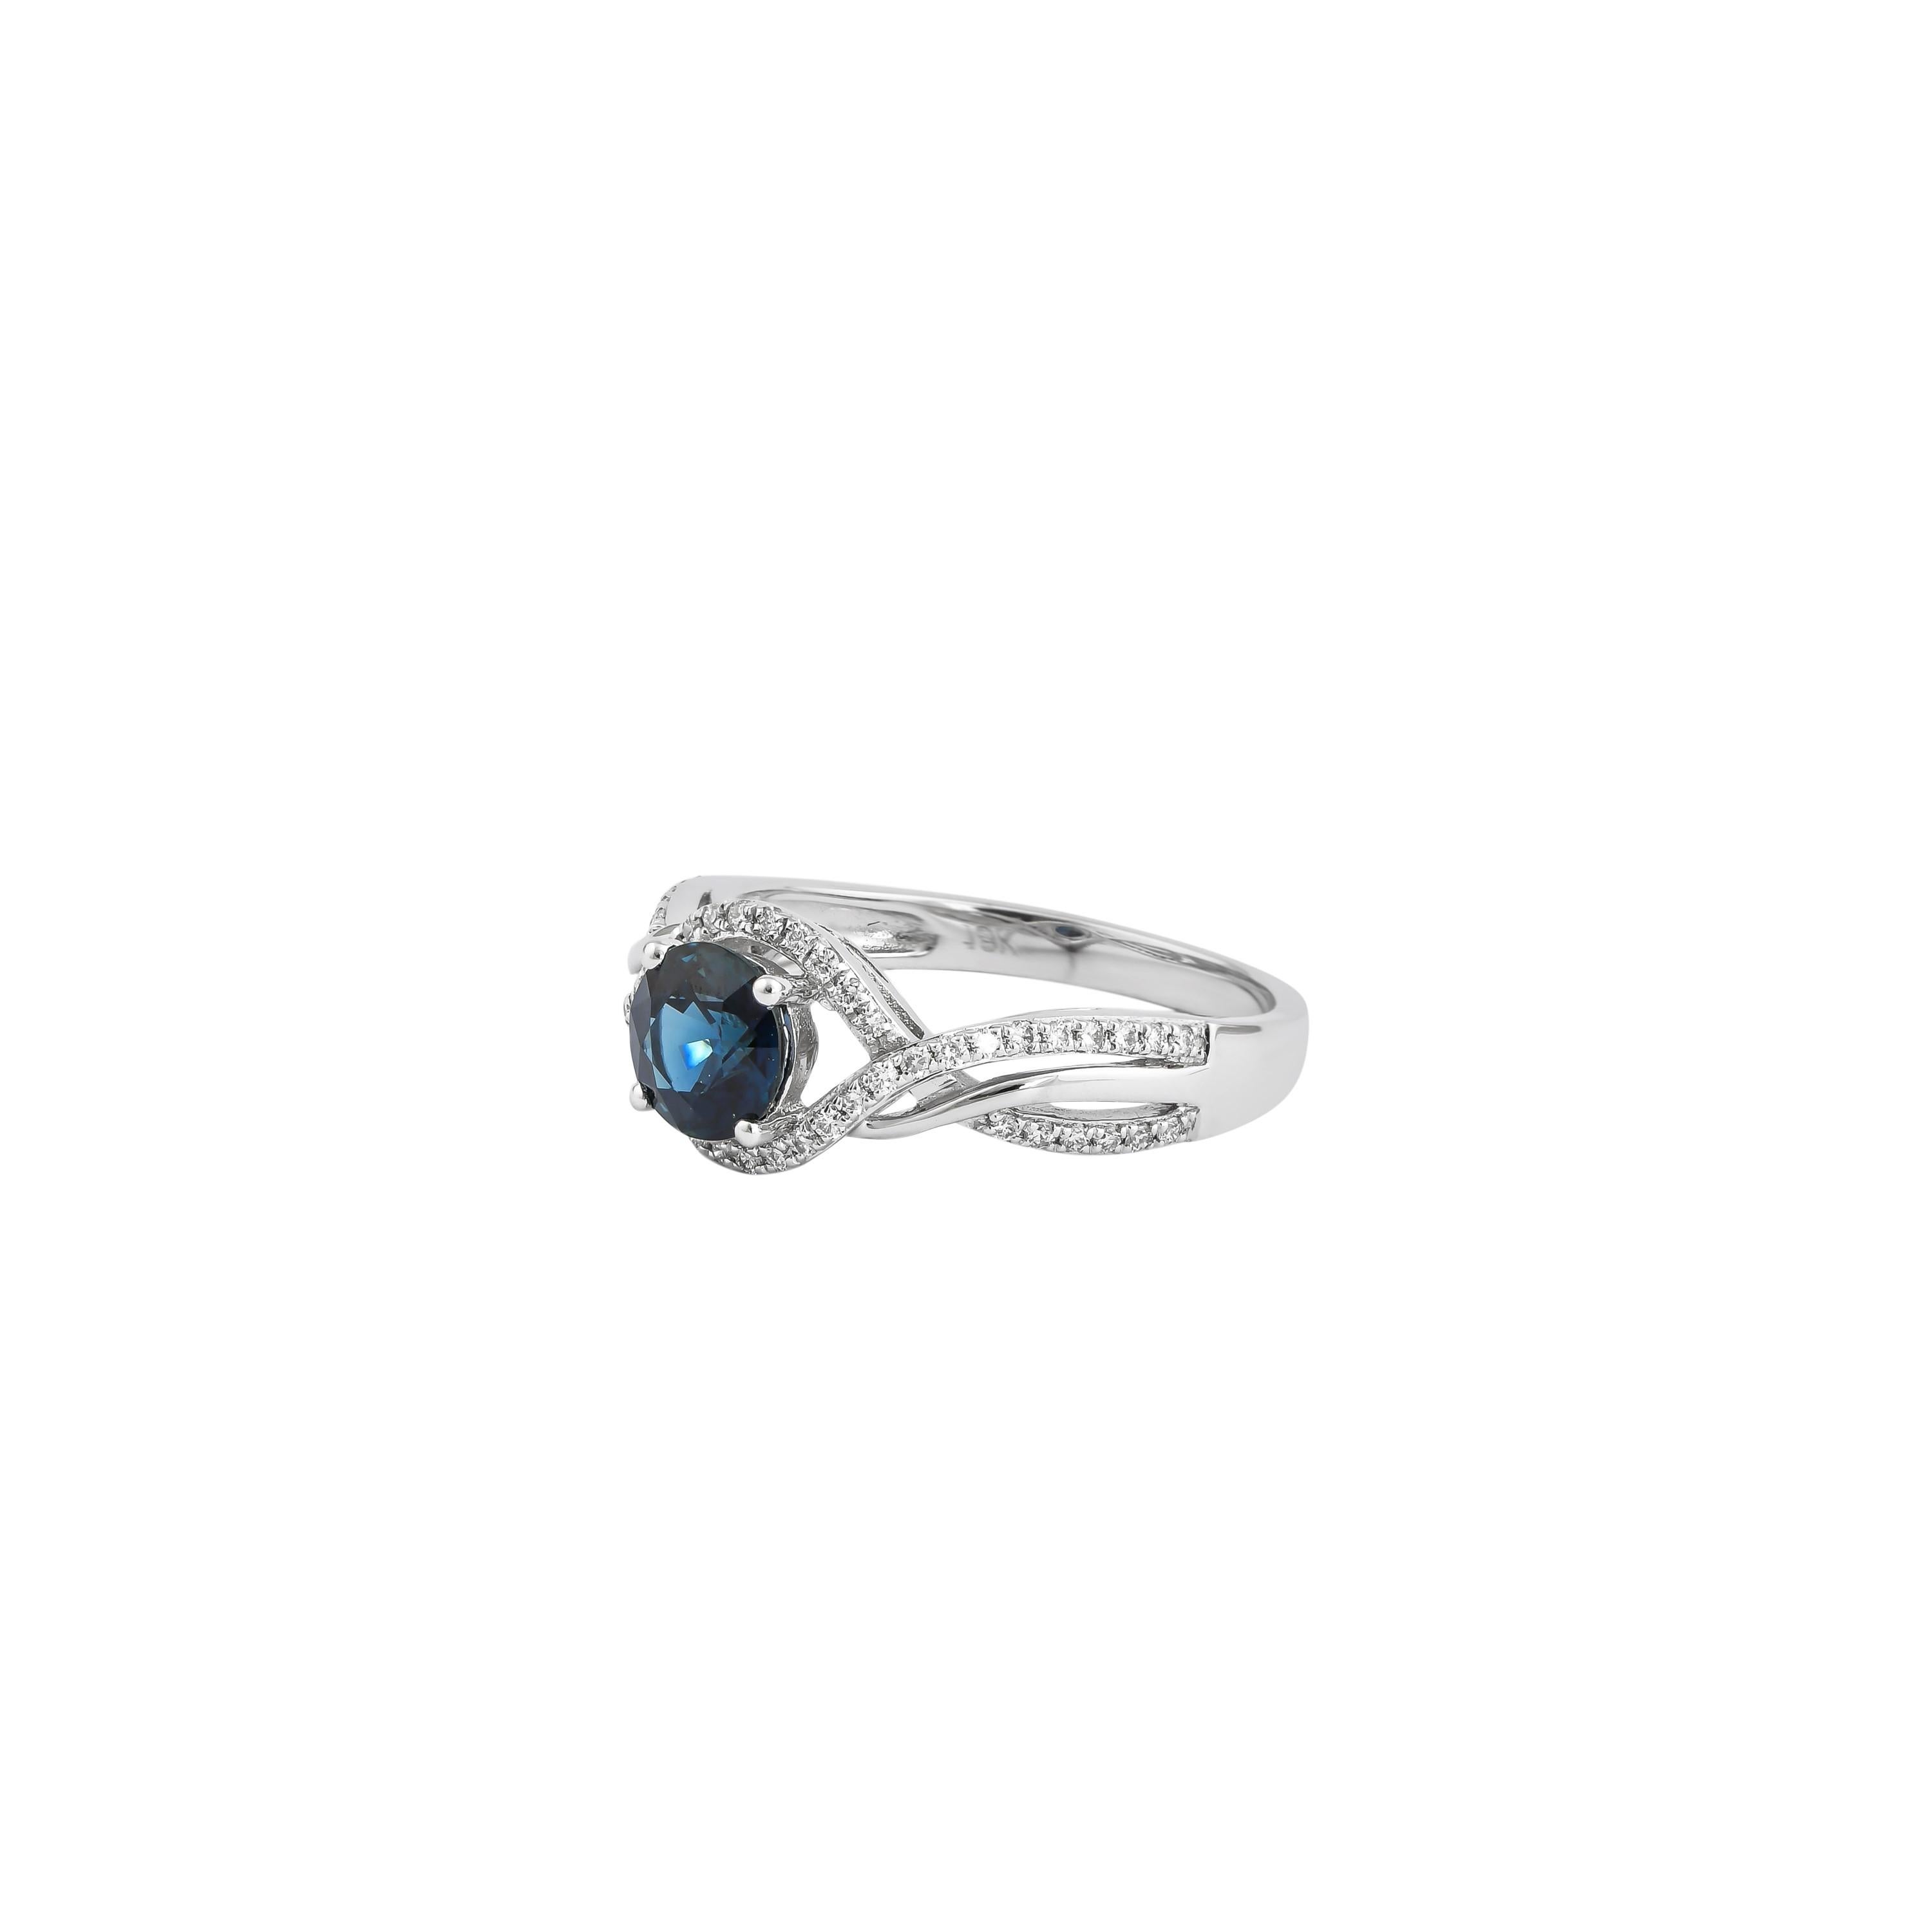 Contemporary 1.1 Carat Blue Sapphire and Diamond Ring in 18 Karat White Gold For Sale